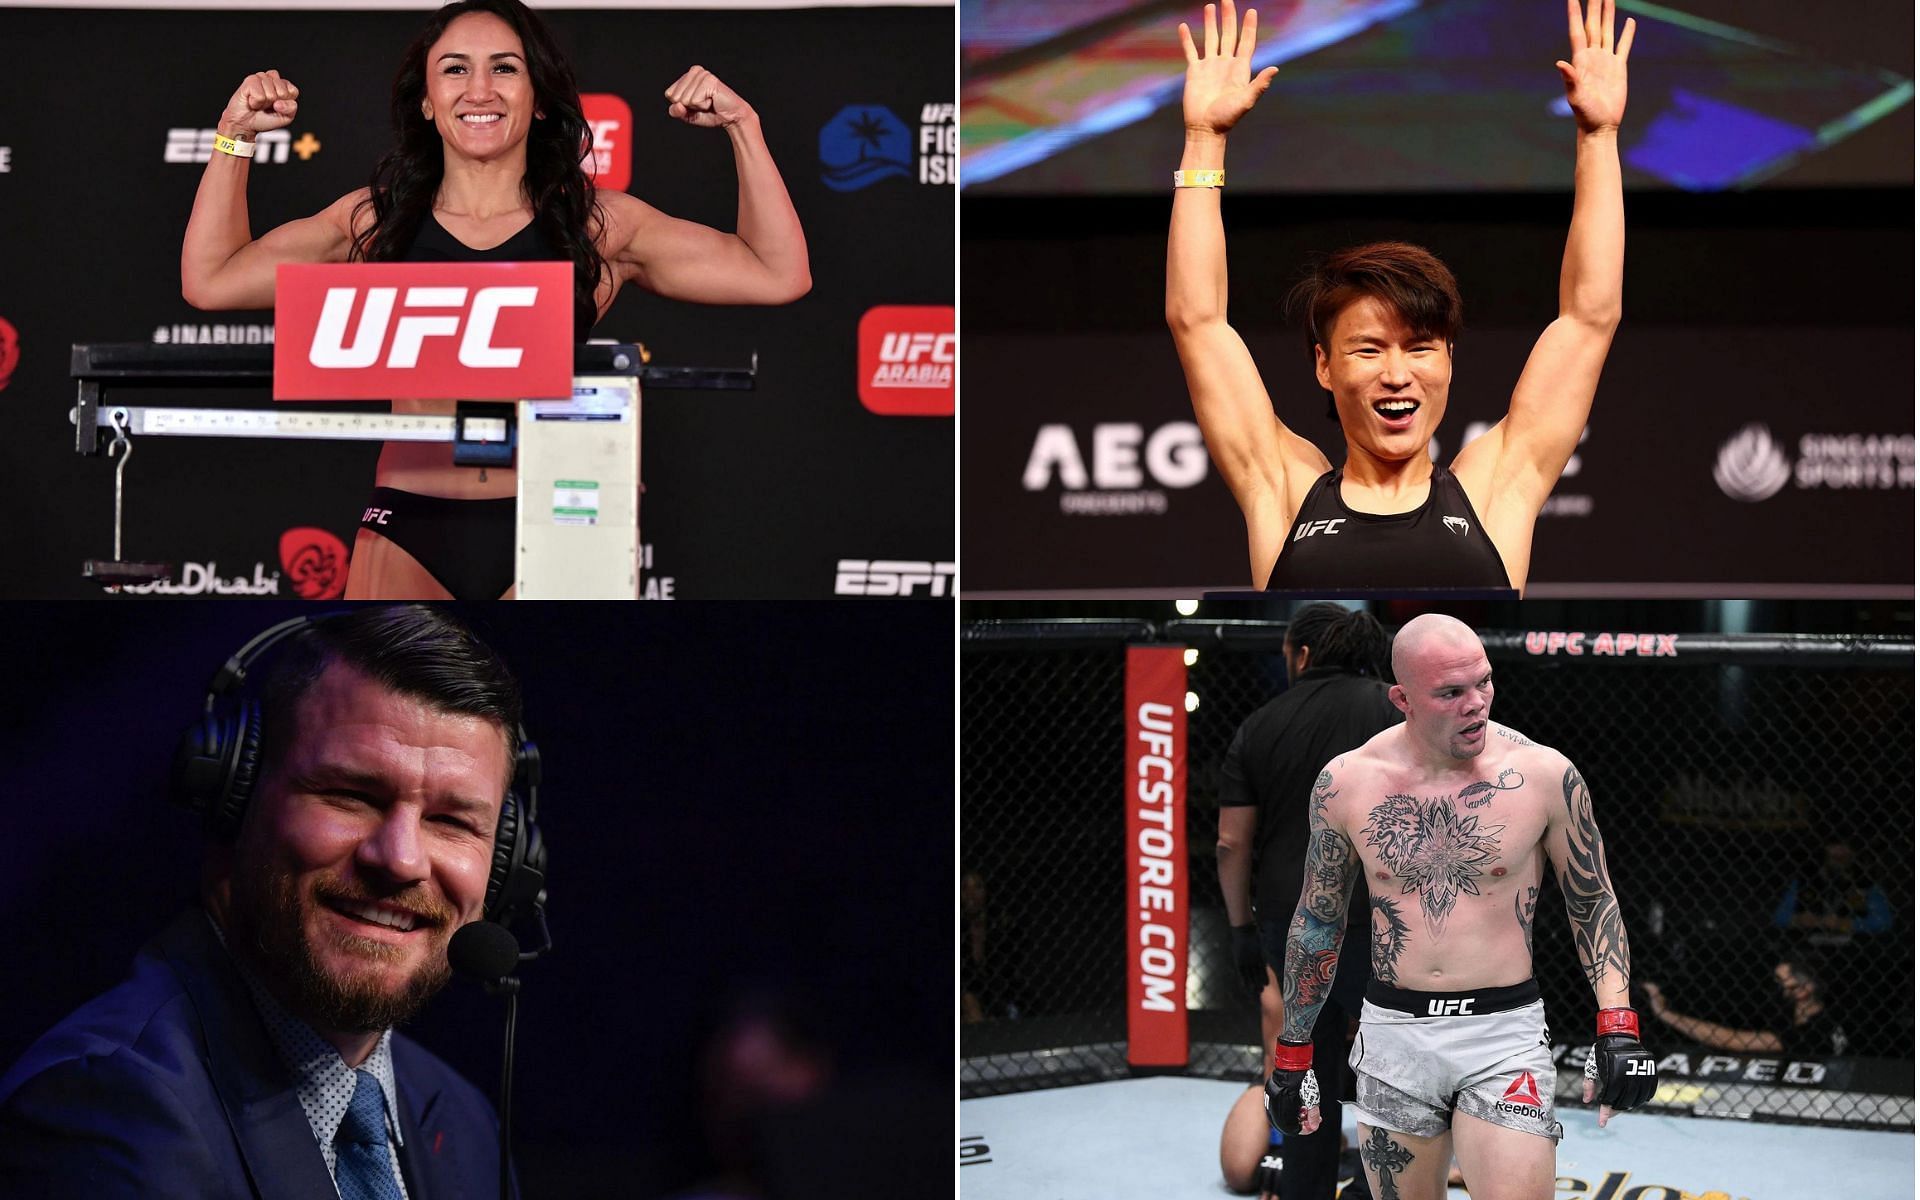 Carla Esparza (Top Left), Zhang Weili (Top Right), Michael Bisping (Bottom Left), and Anthony Smith (Bottom Right) (Images courtesy of Getty)